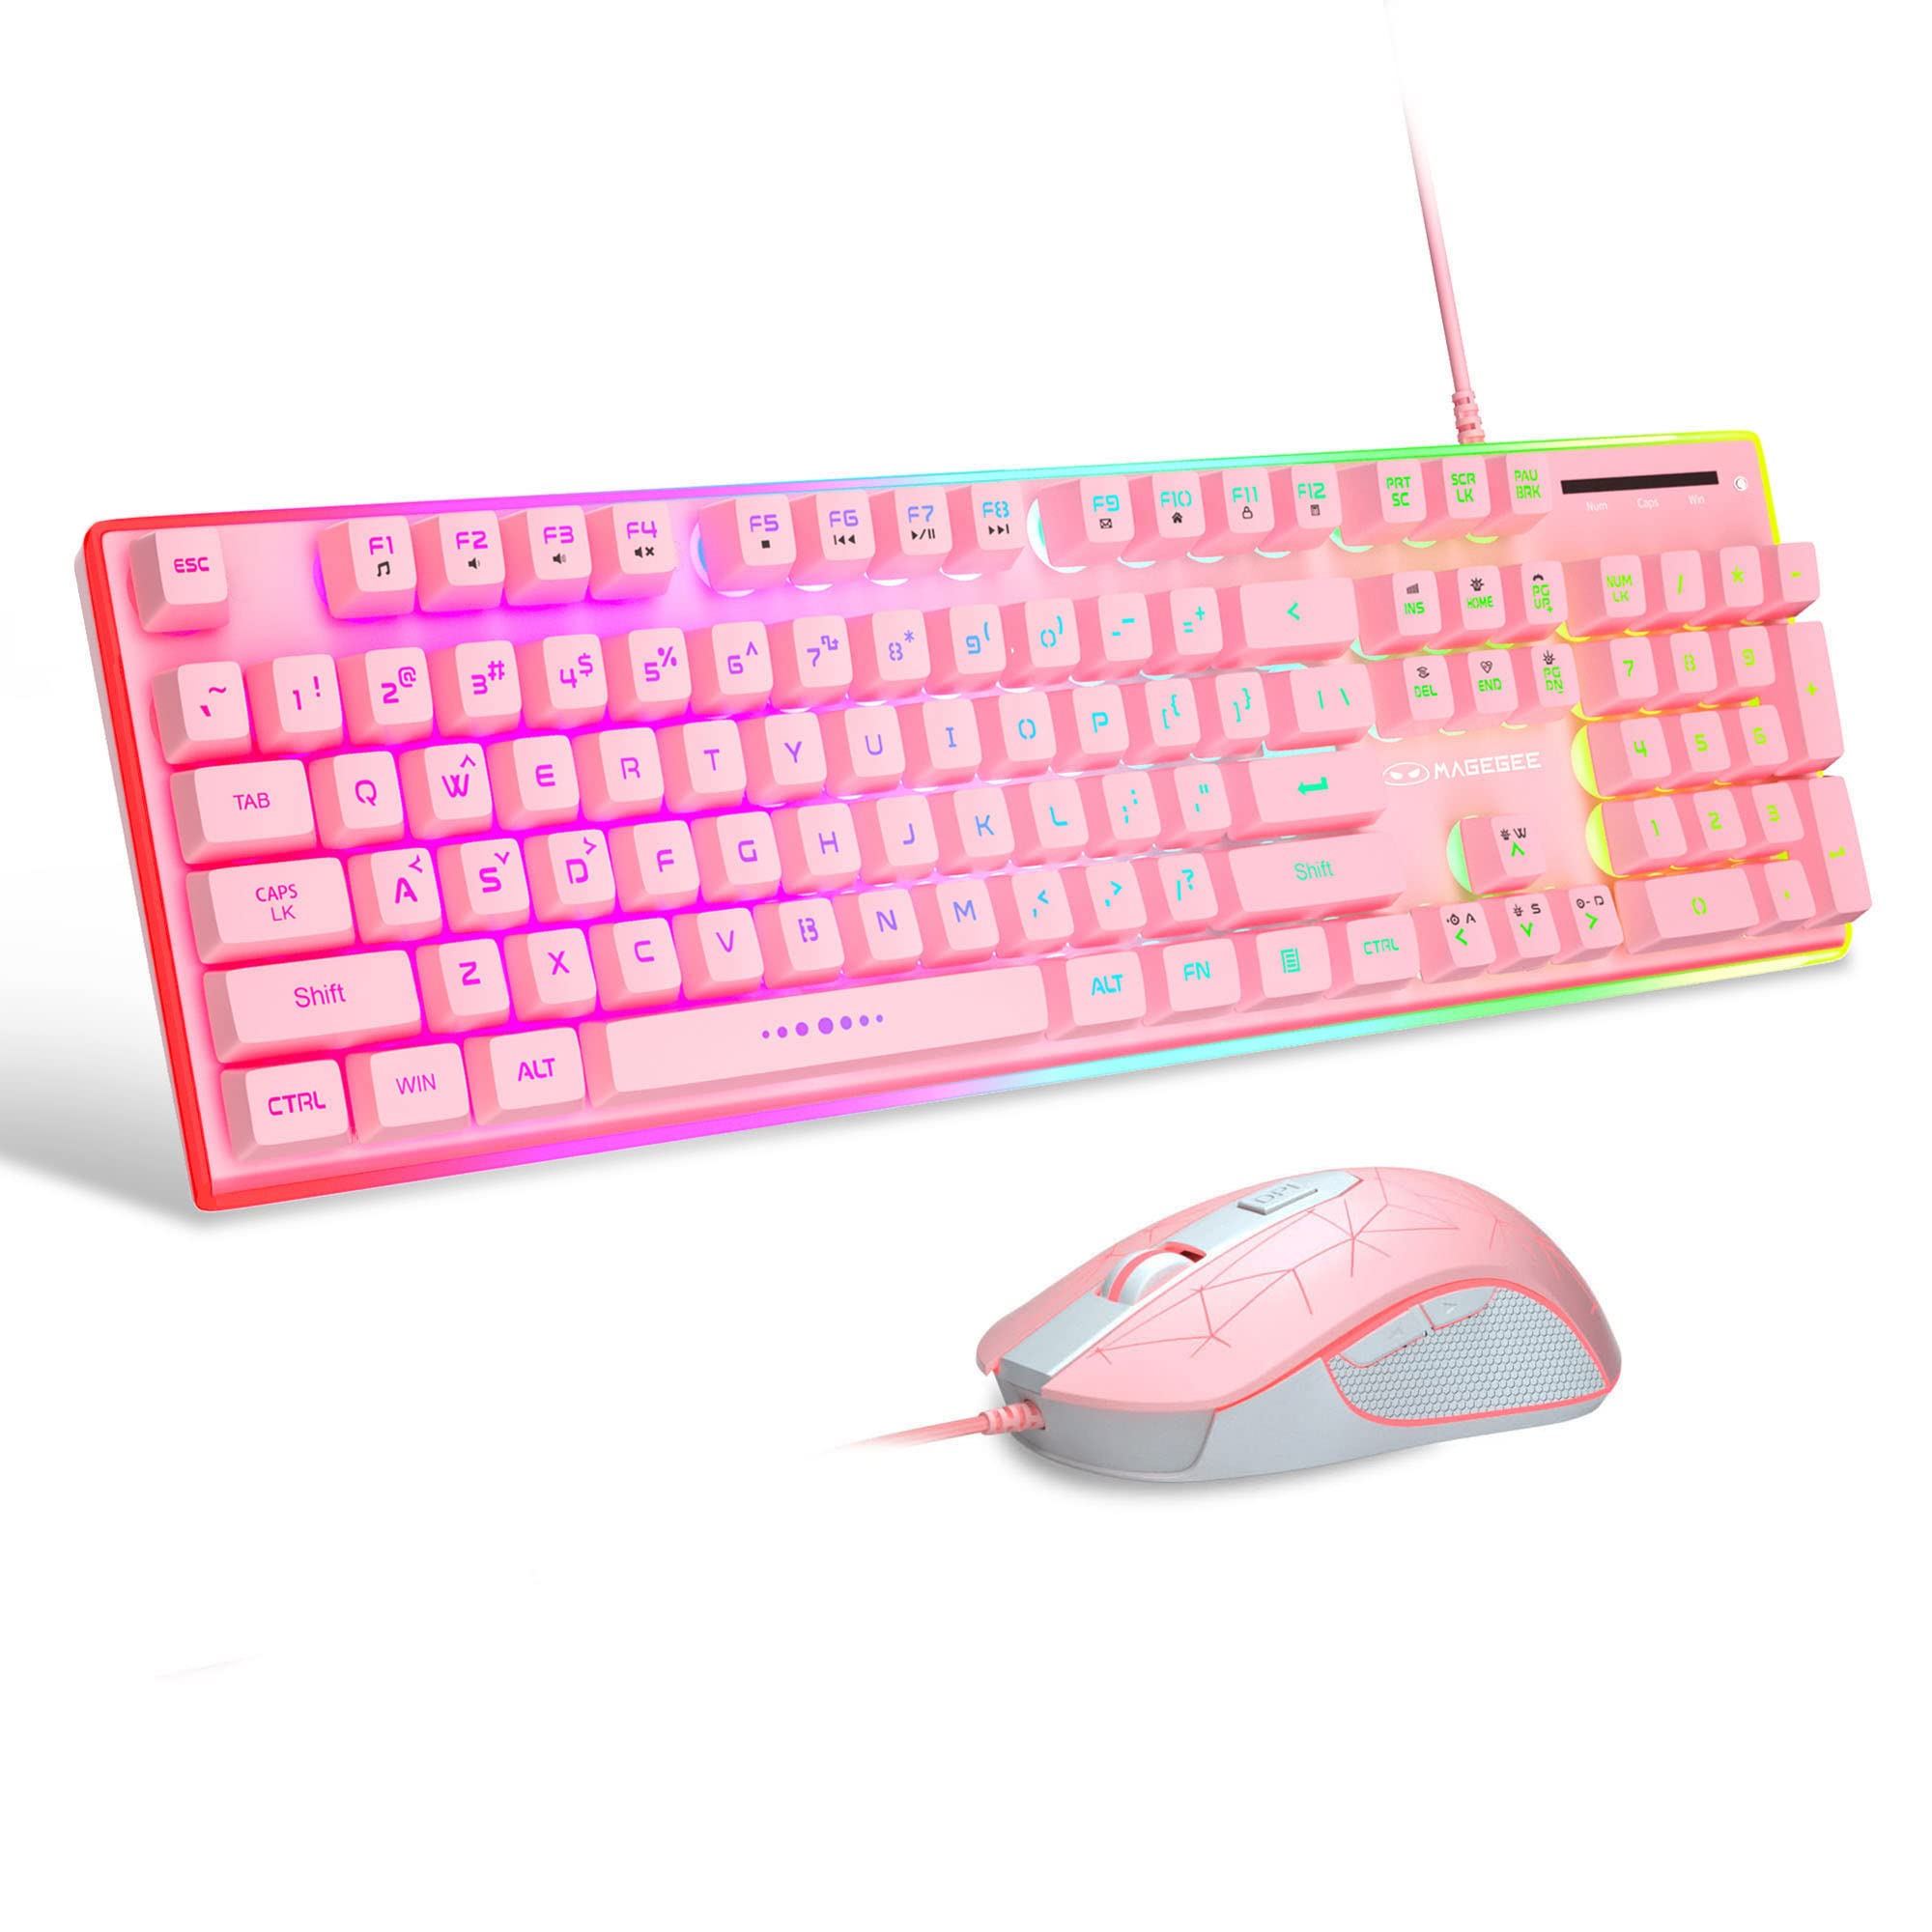 MageGee Gaming Keyboard and Mouse Combo, True RGB Backlit Membrane Office Keyboard, 104 Keys Metal Panel USB Quiet Wired Keyboard for Windows Laptop PC - Pink